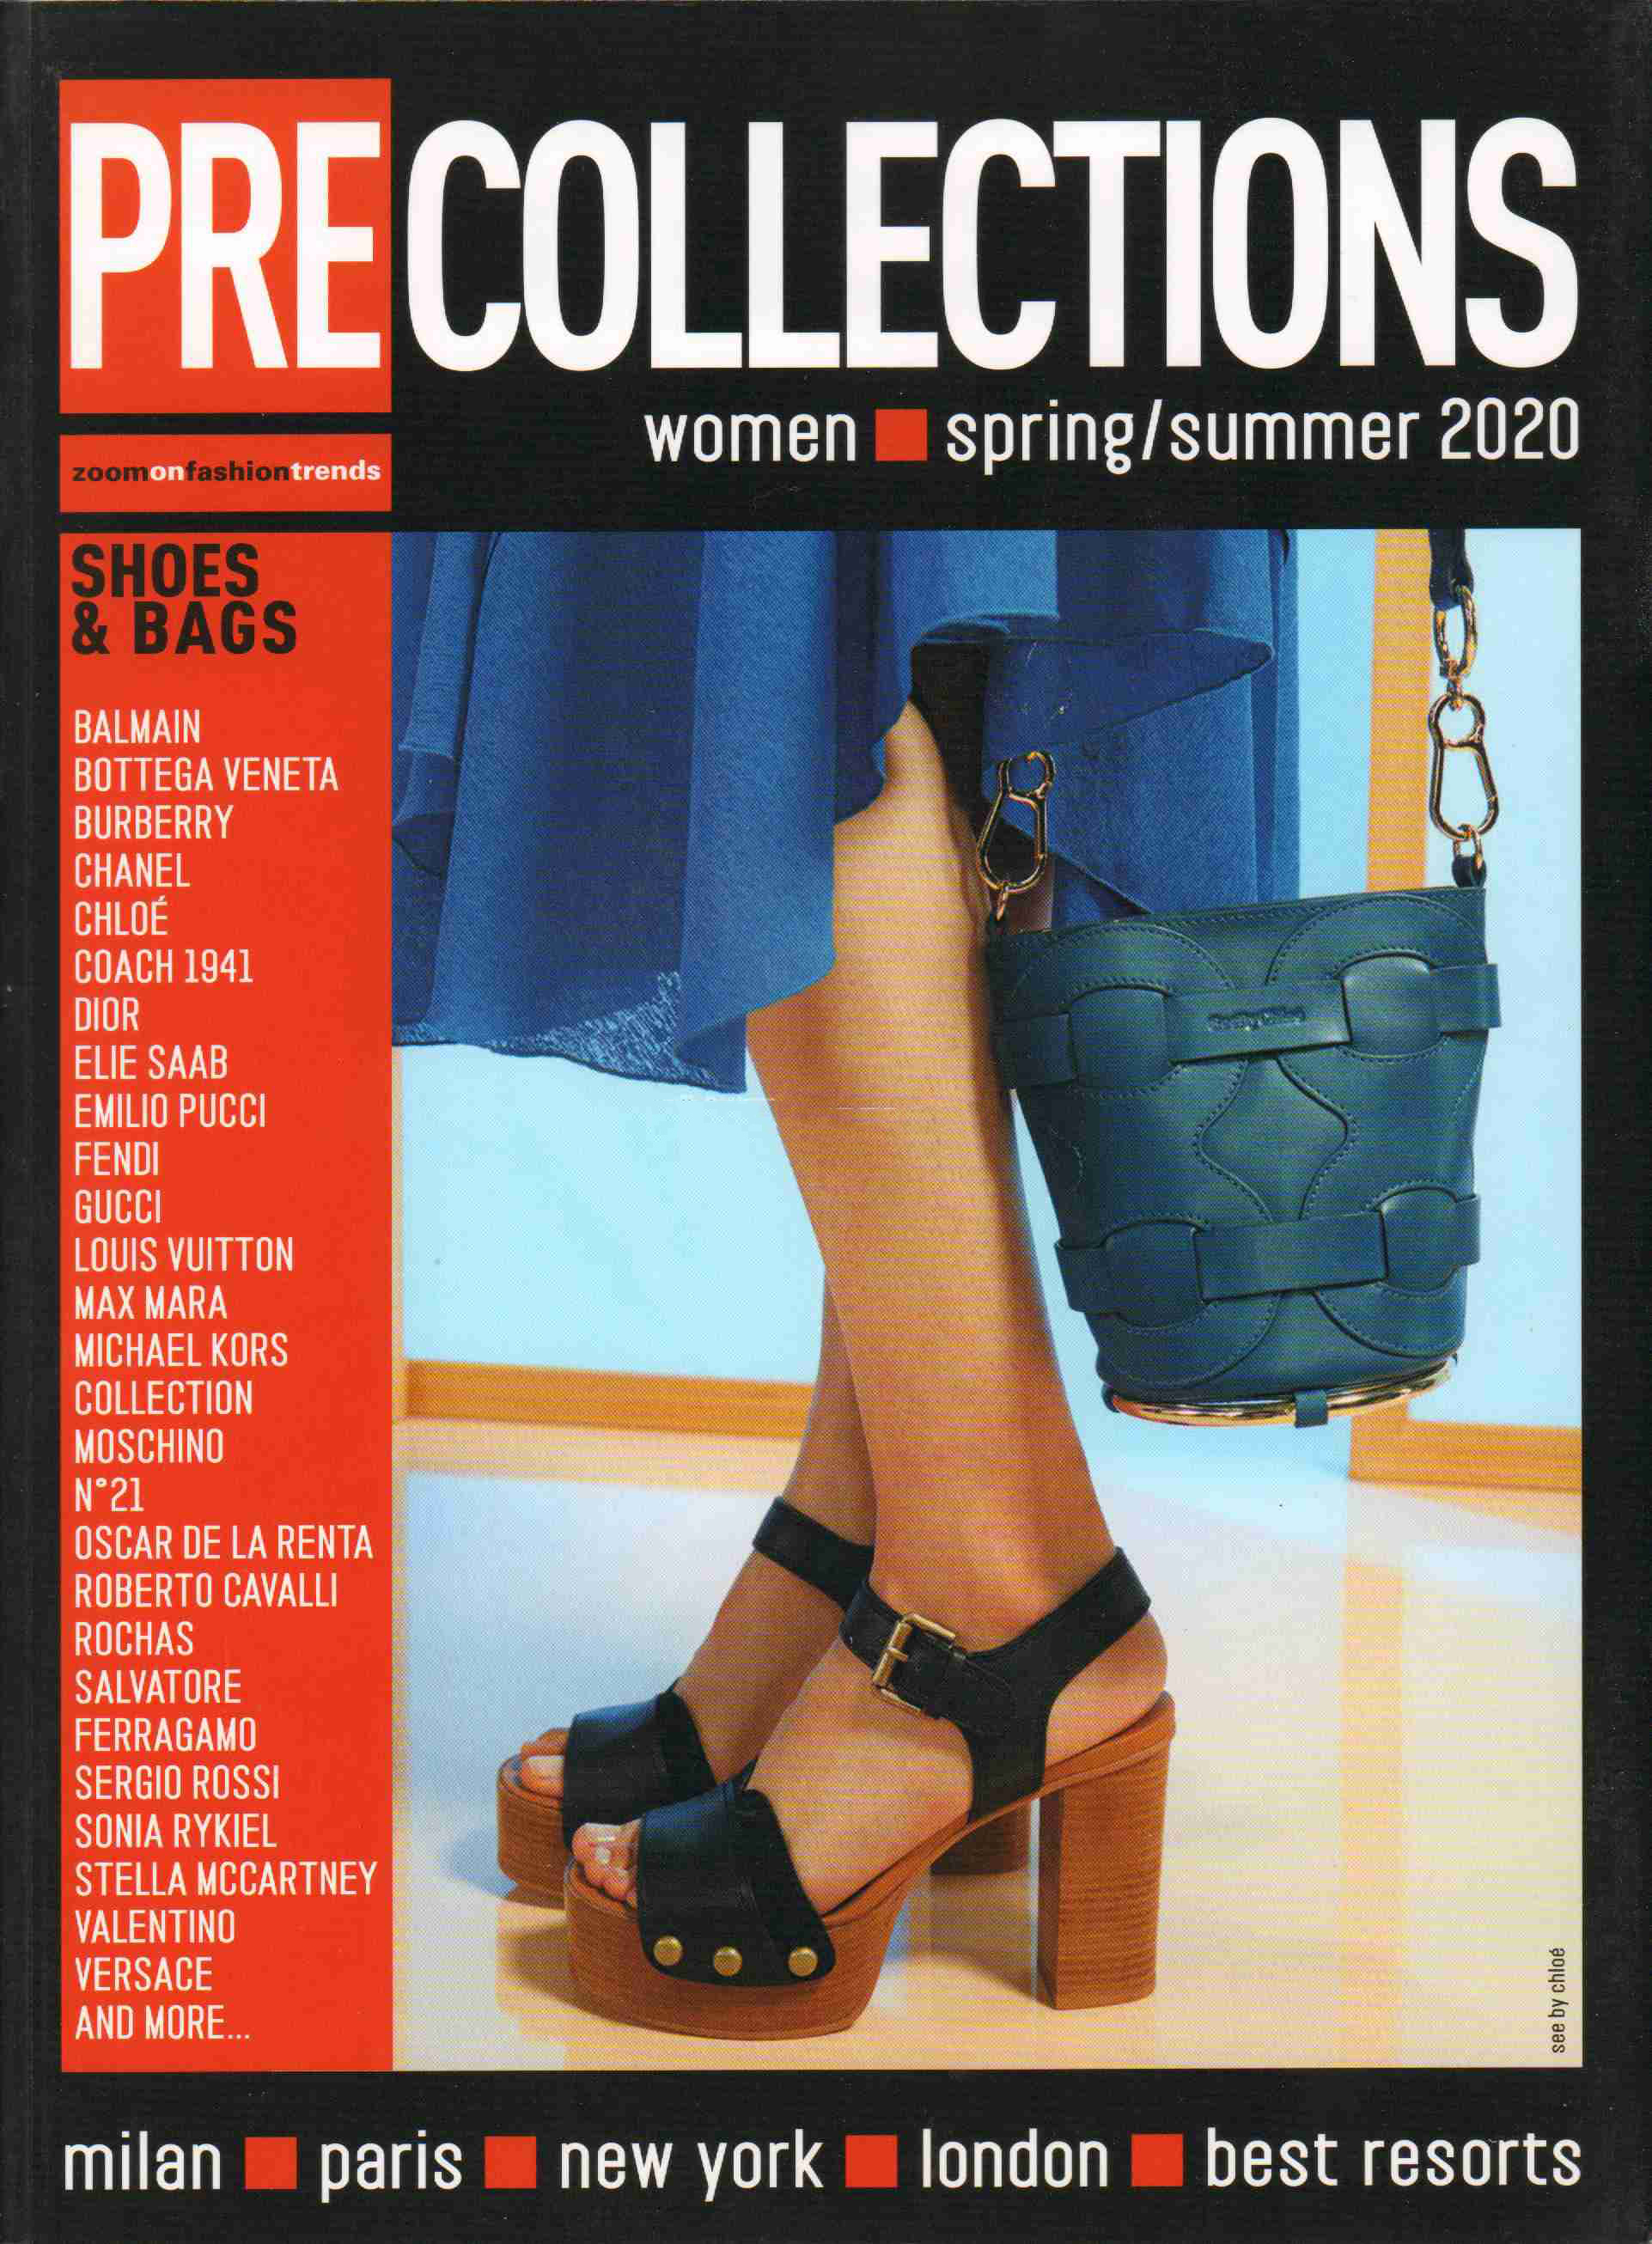 《Pre Collections Shoes & Bags》意大利专业箱包杂志2020春夏号